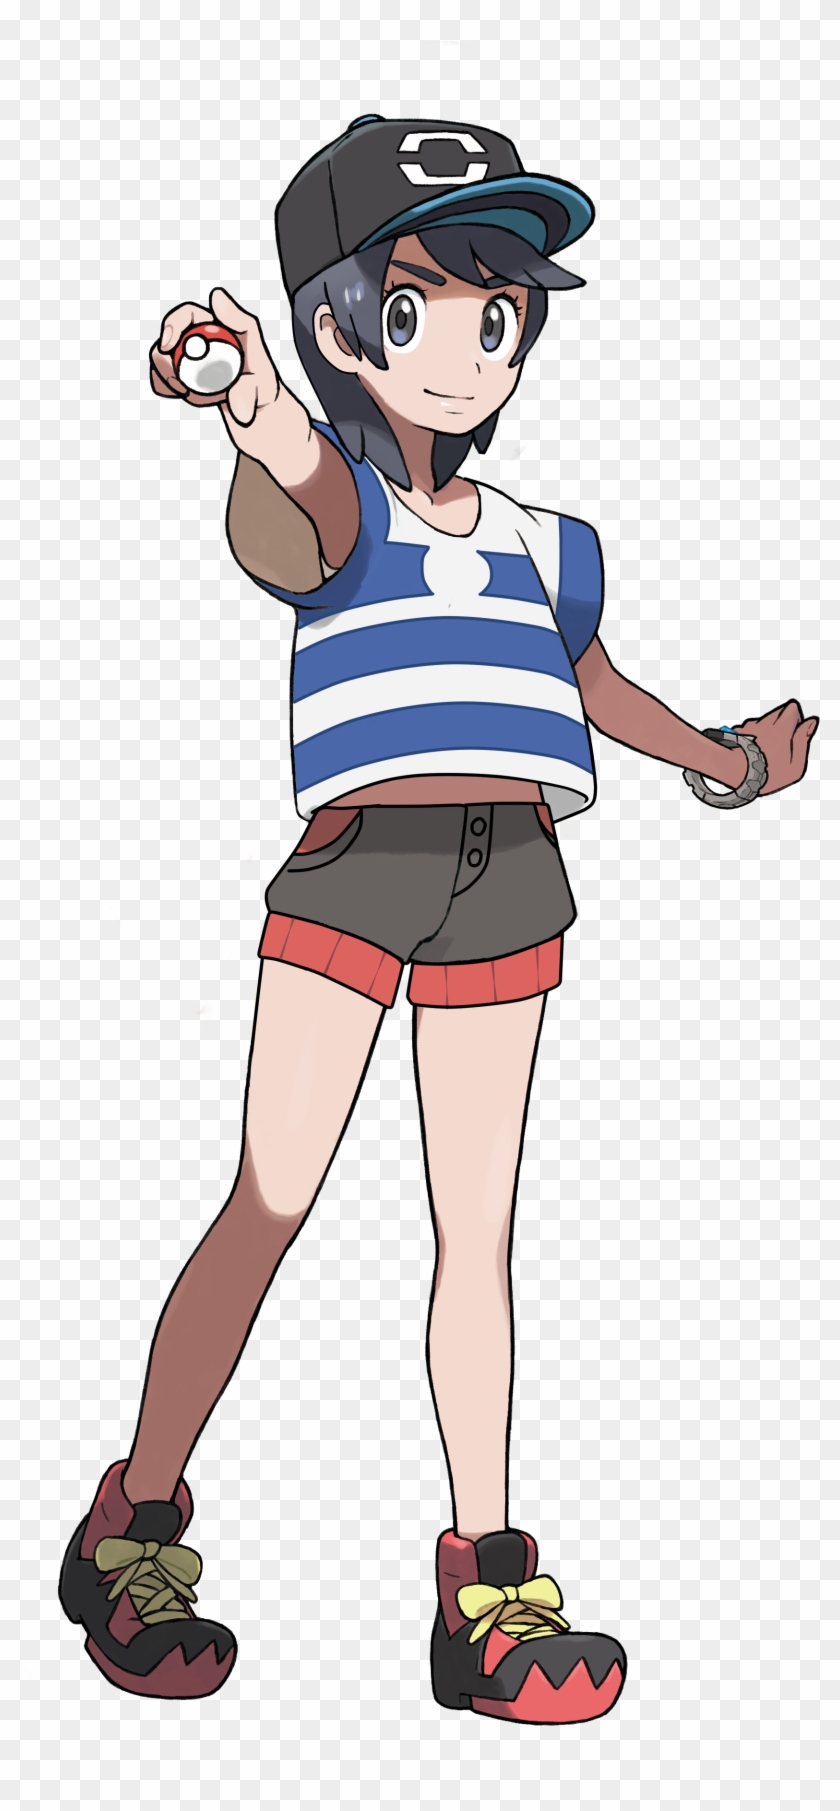 Genderbend Sun Pokemon Trainer Red, Pokemon Trainers, - Sun And Moon Team Skull Outfit, HD Png - 1938x3865(#4770069) - PngFind